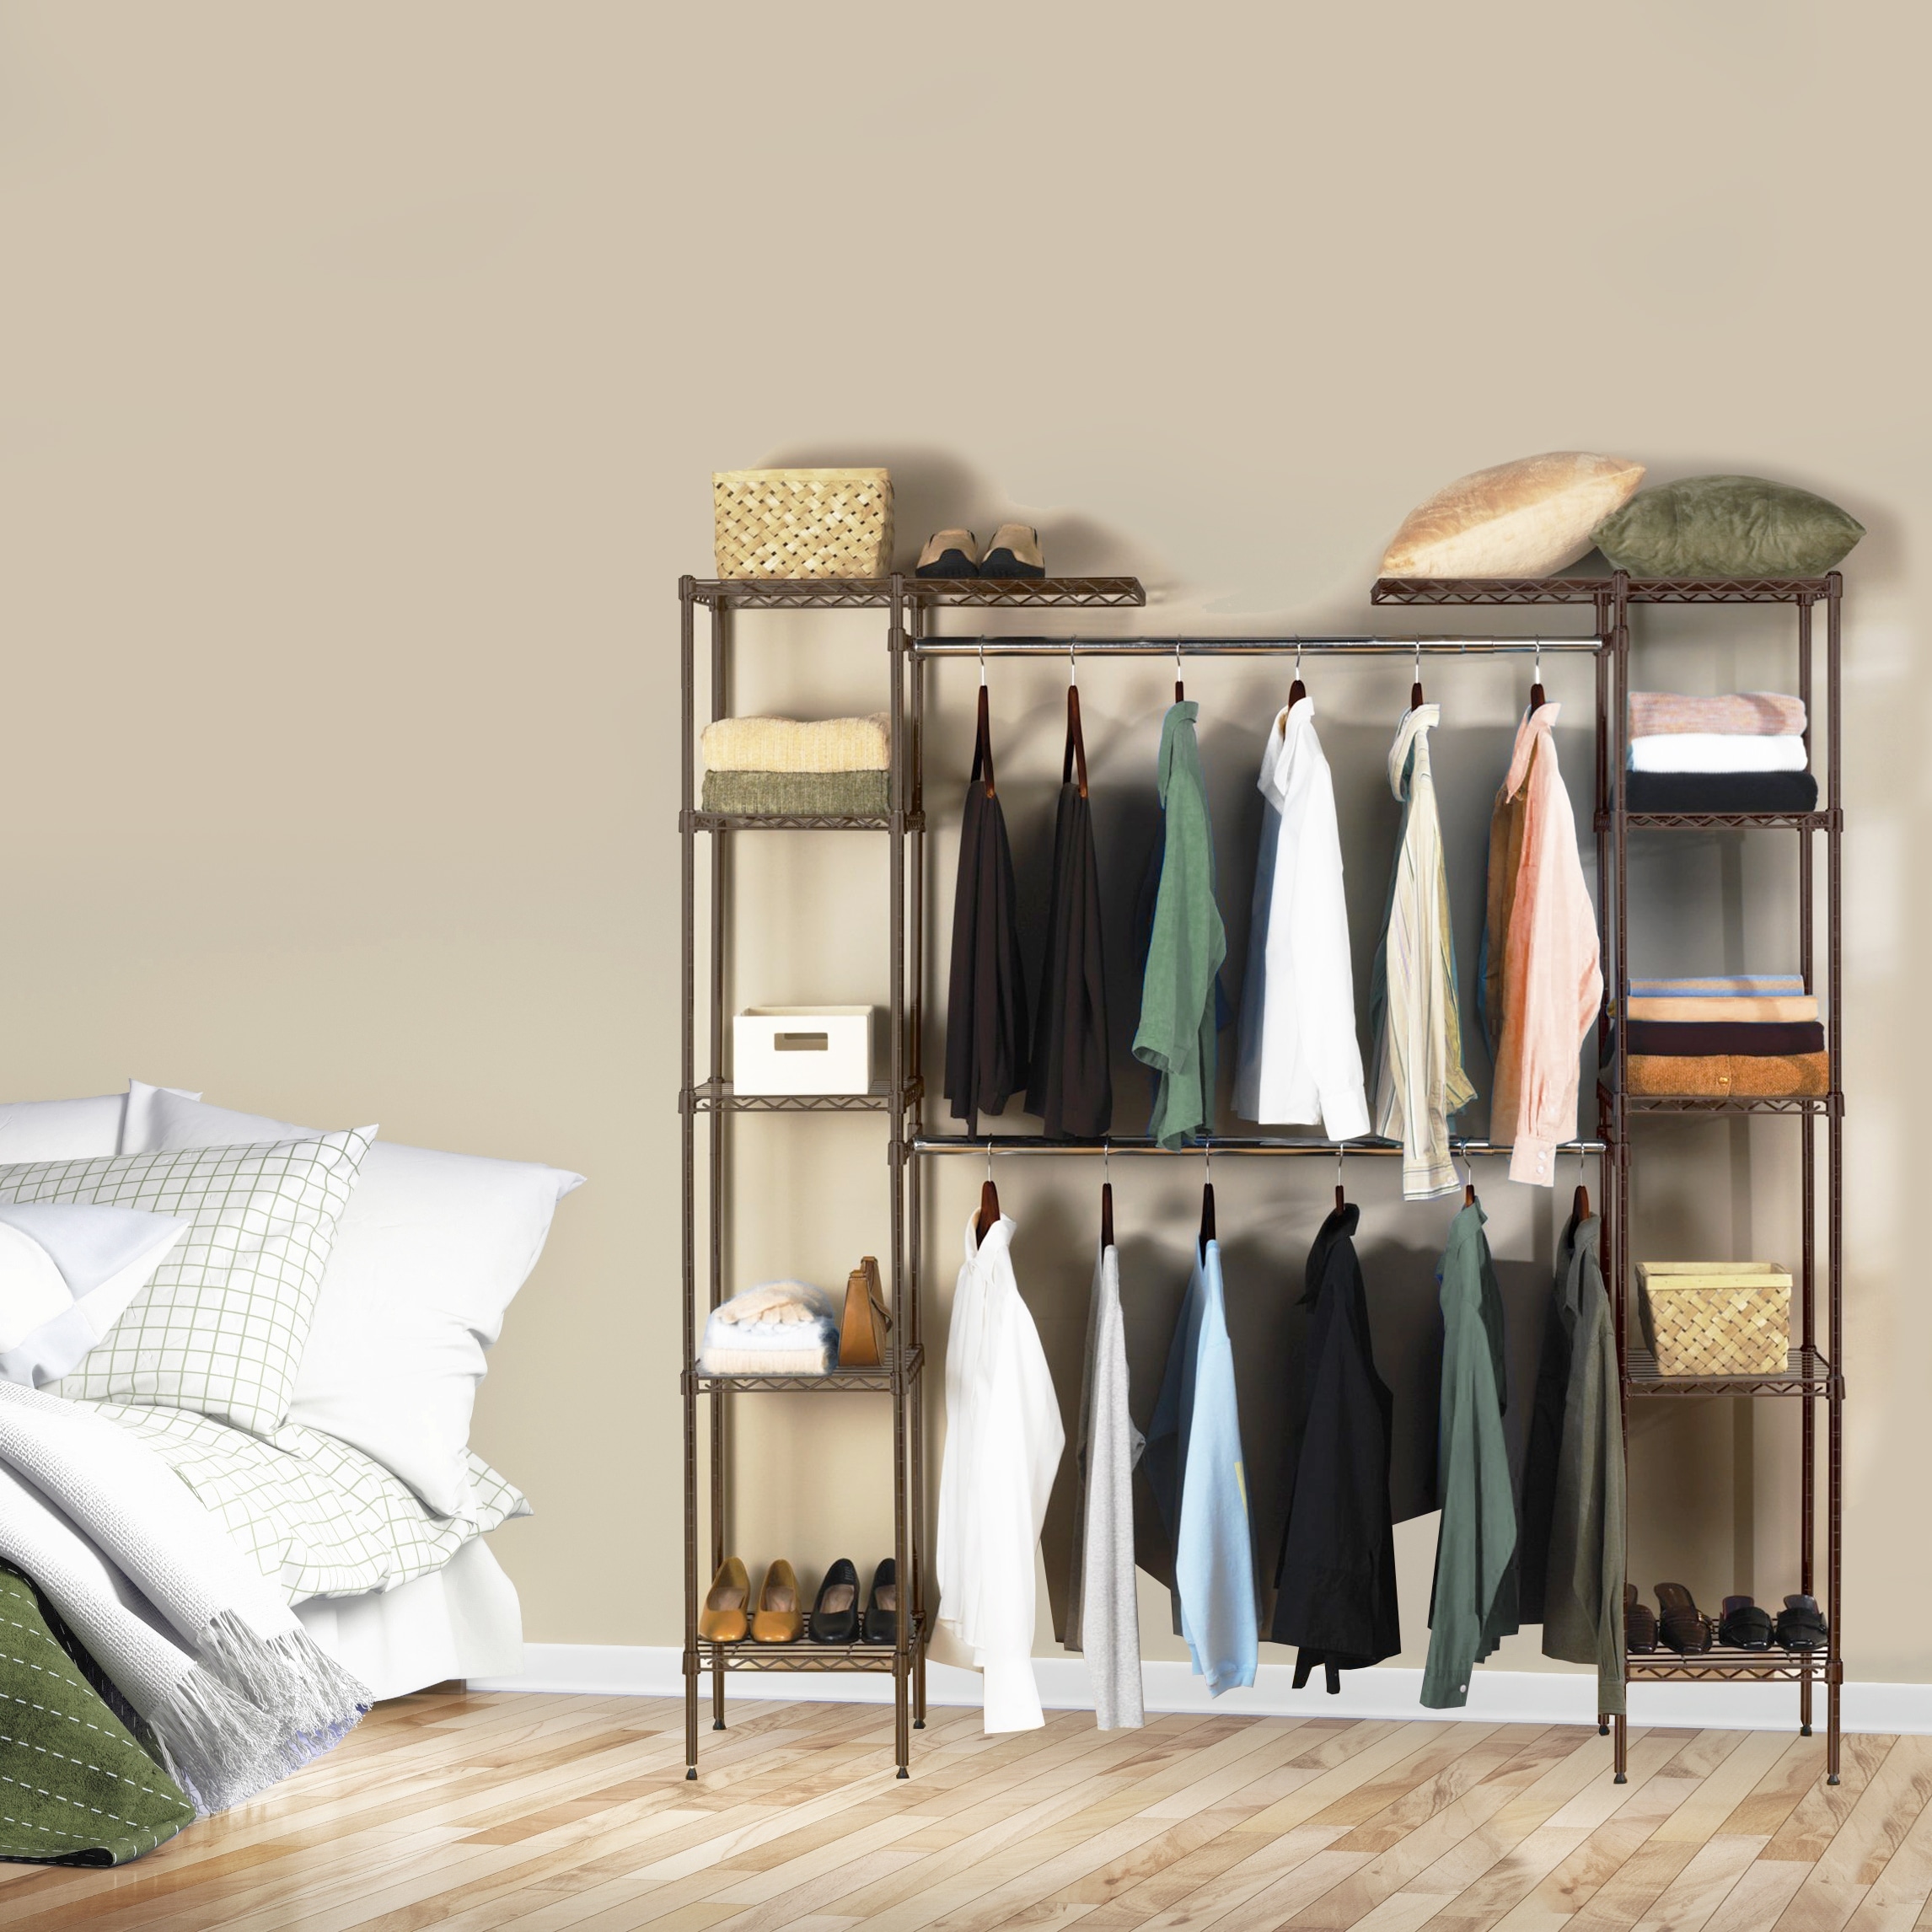 https://ak1.ostkcdn.com/images/products/is/images/direct/019d6d7c3a34bcc73d6a8e143b9d13703ca83786/Satin-Bronze-Expandable-Closet-Organizer-System.jpg